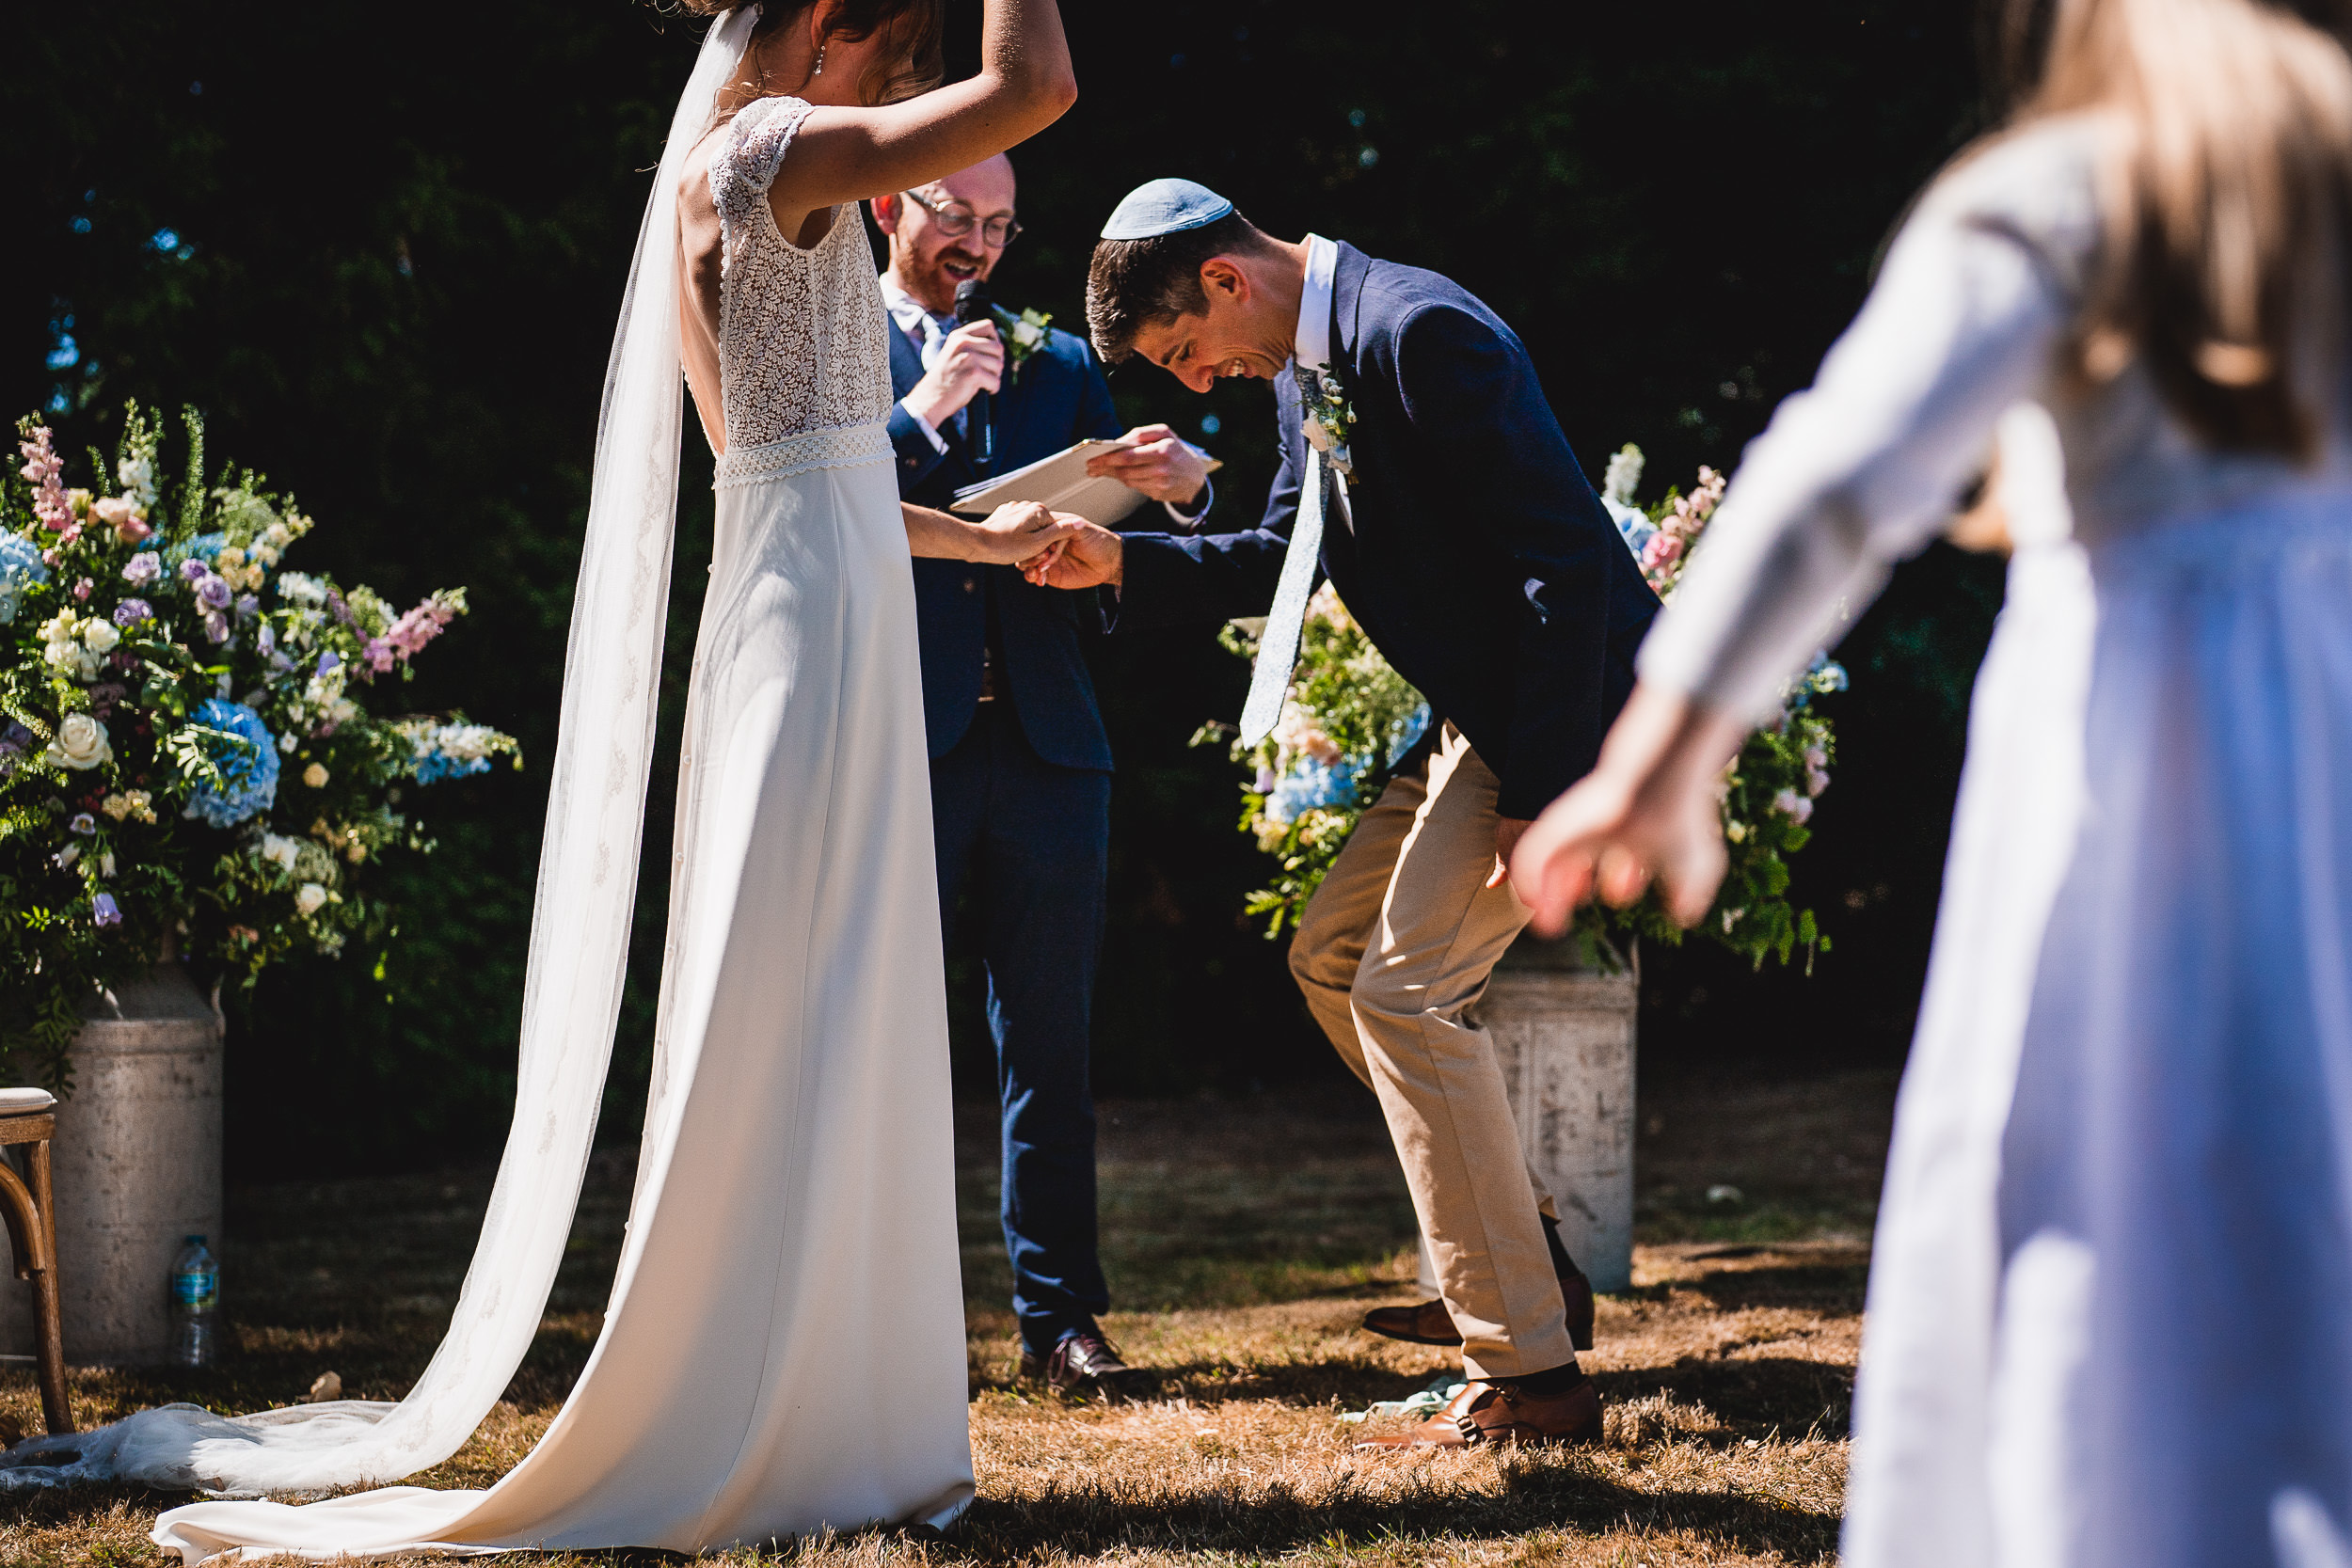 A wedding ceremony captured by a wedding photographer.